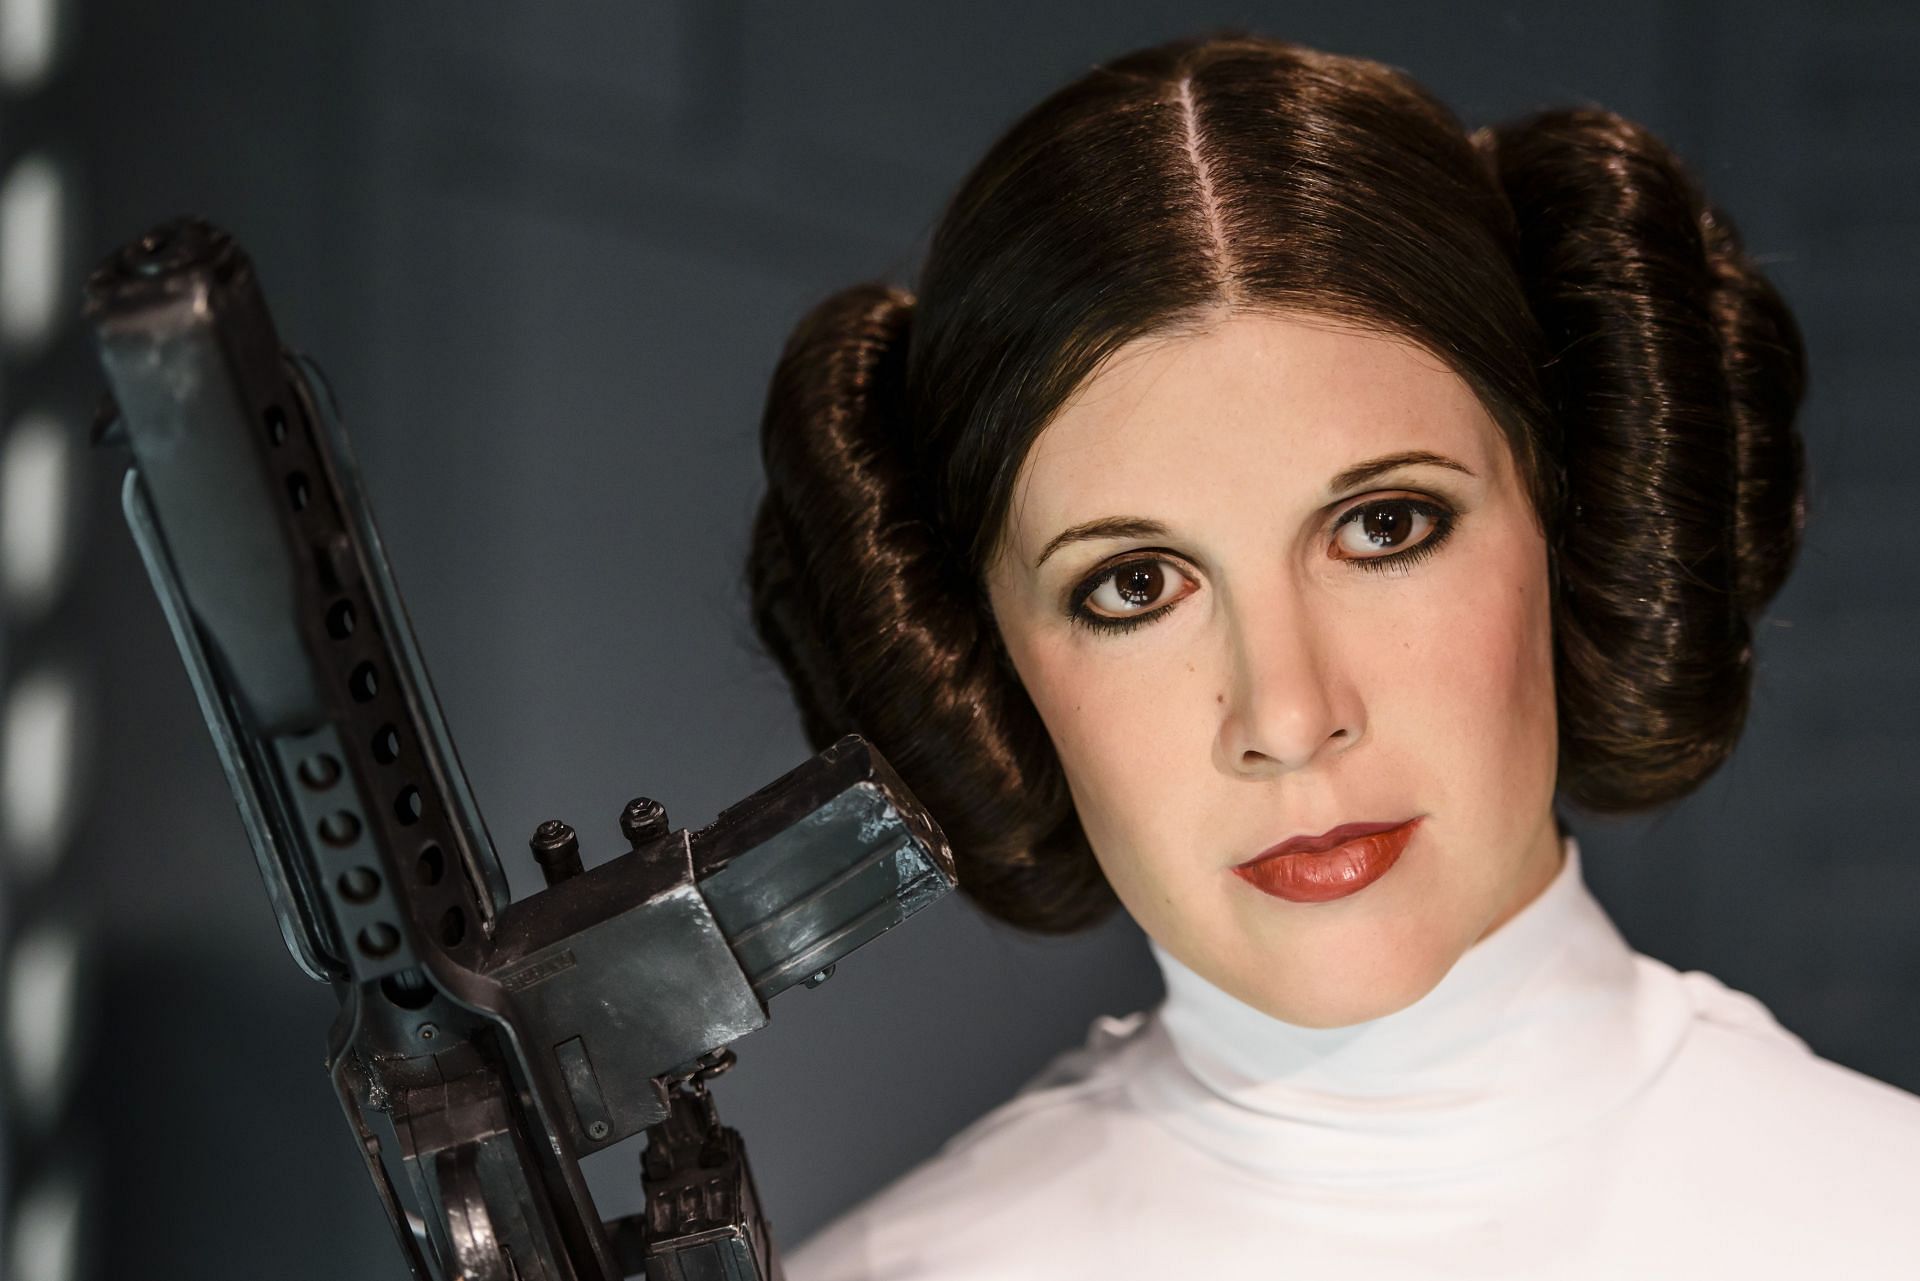 A Wax Figure of Carrie Fisher as Princess Leia at Madame Tussauds in Berlin, (Photo by Clemens Bilan/Getty Images)